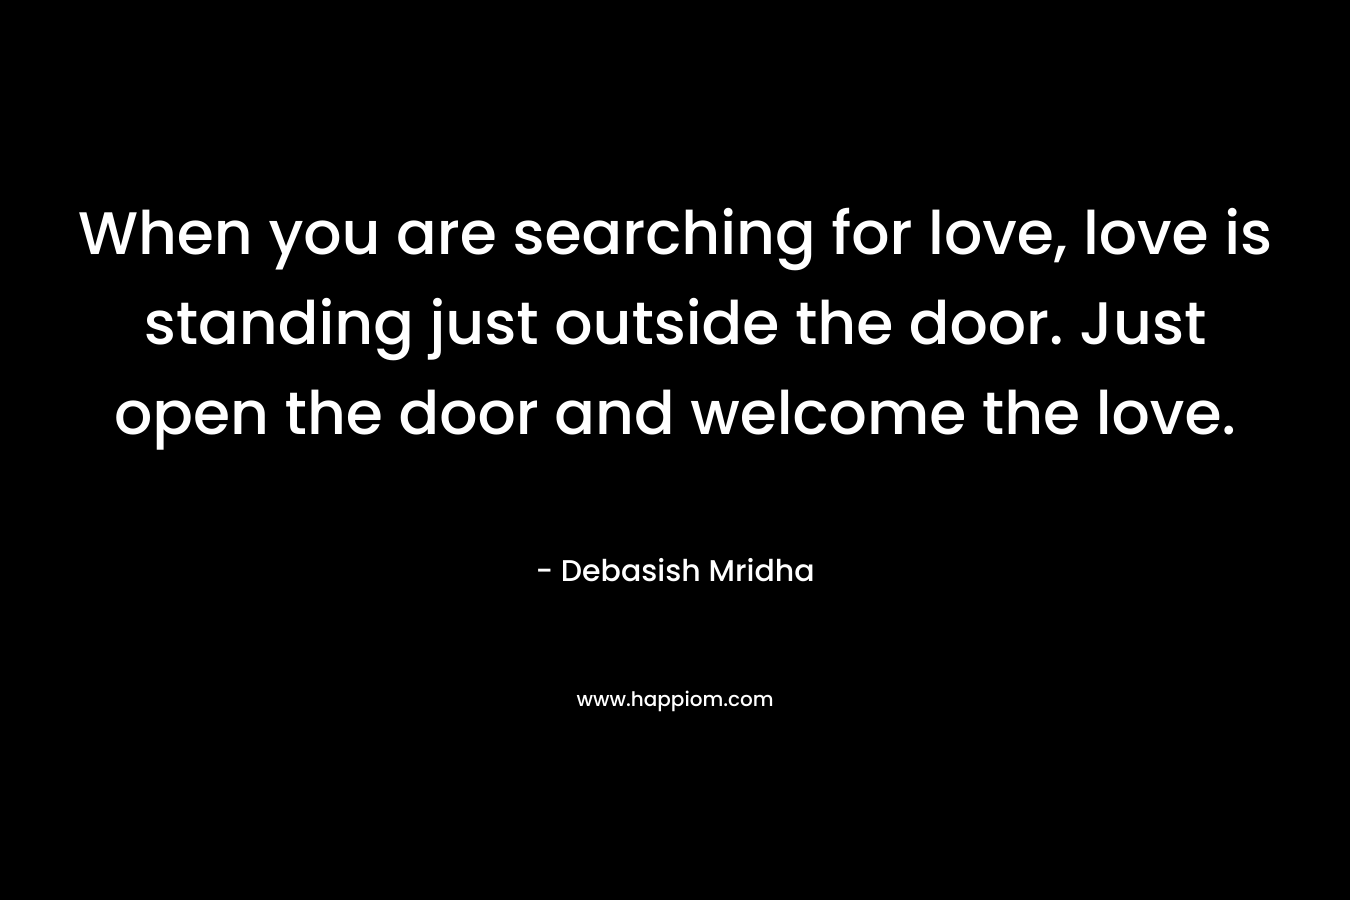 When you are searching for love, love is standing just outside the door. Just open the door and welcome the love.